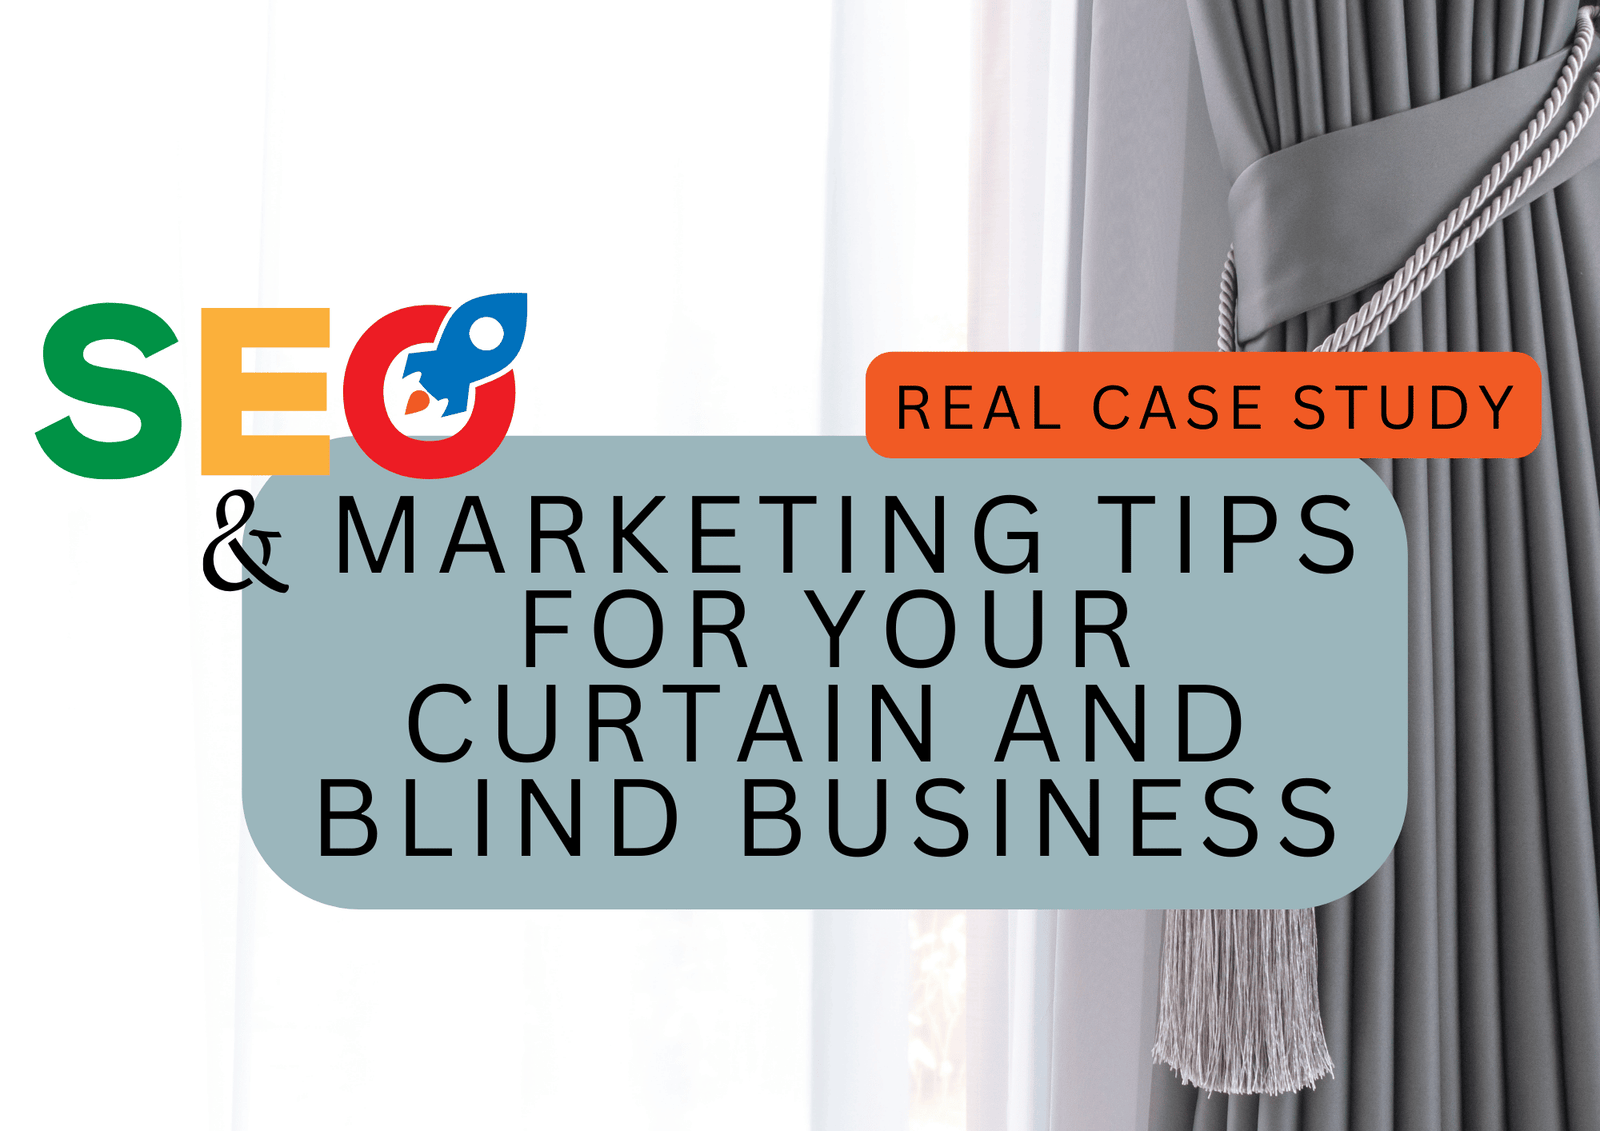 Interioapp software for curtain and window blind retailers. SEO and marketing tips